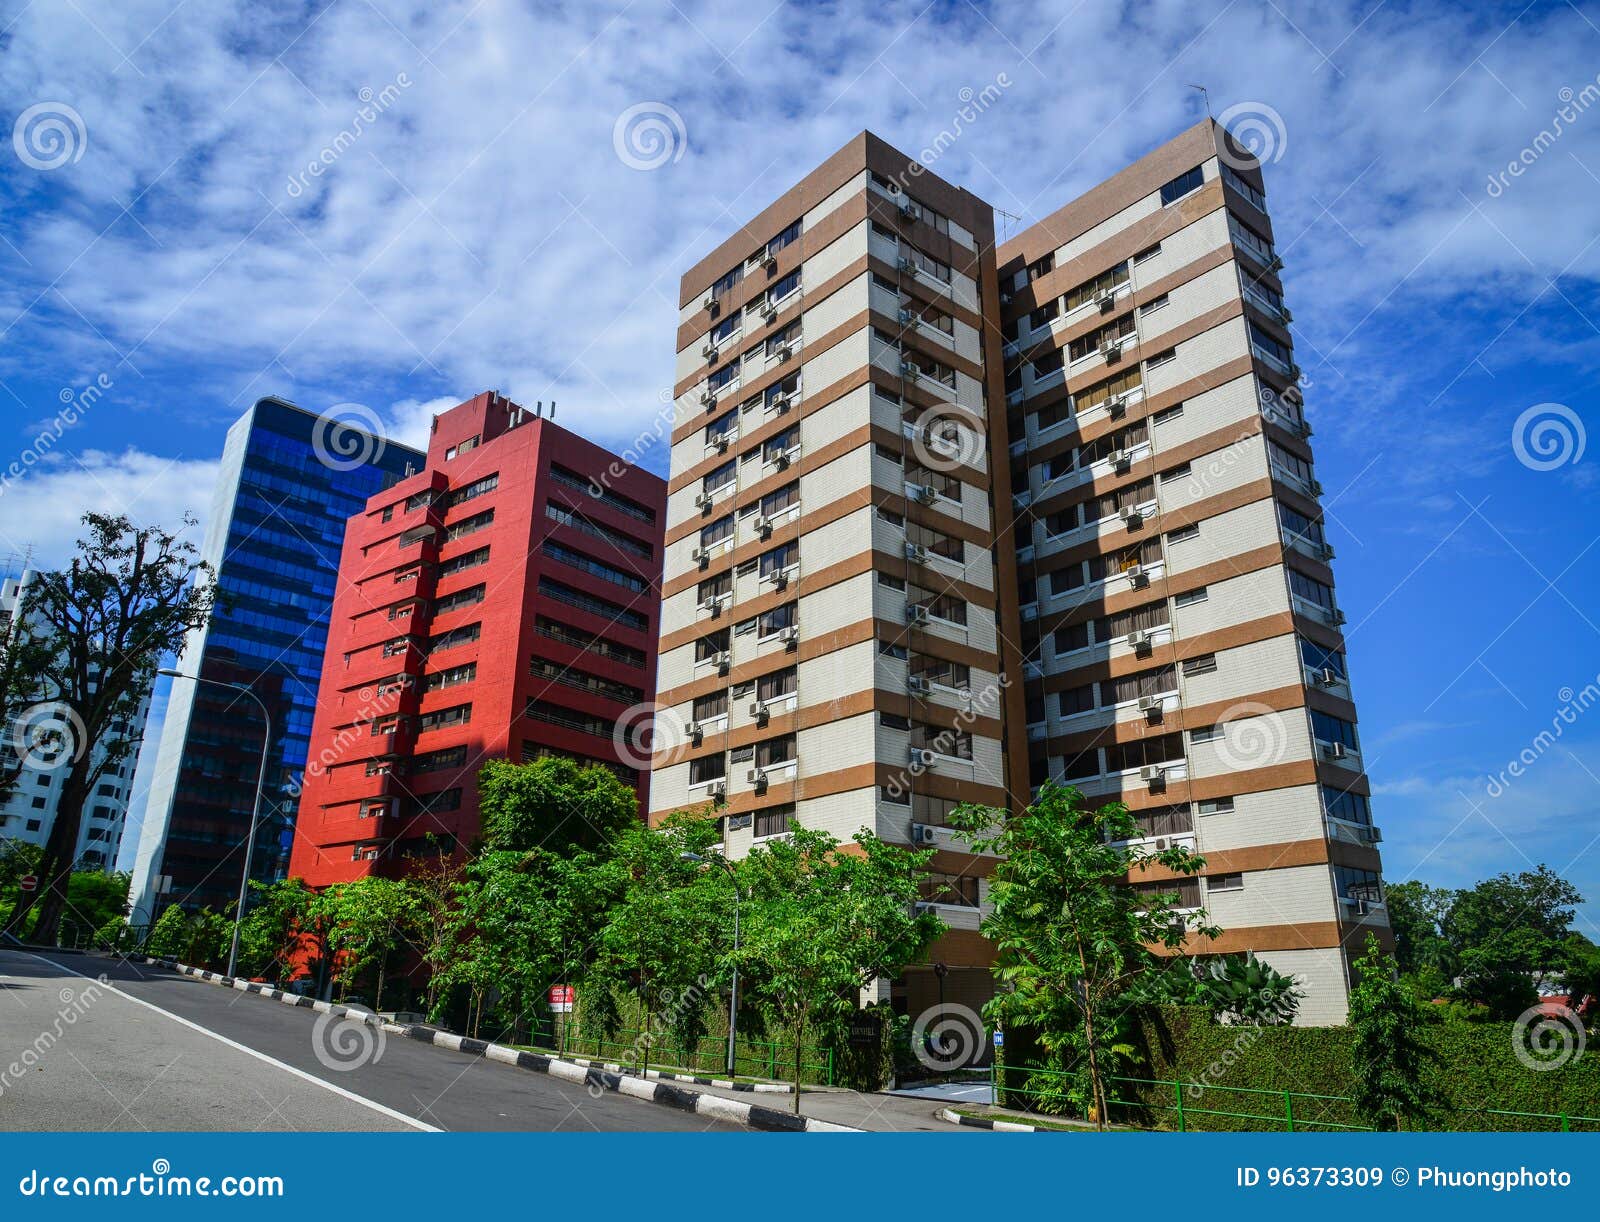 luxury-apartments-singapore-jun-modern-located-cairnhill-estimated-population-was-people-96373309.jpg